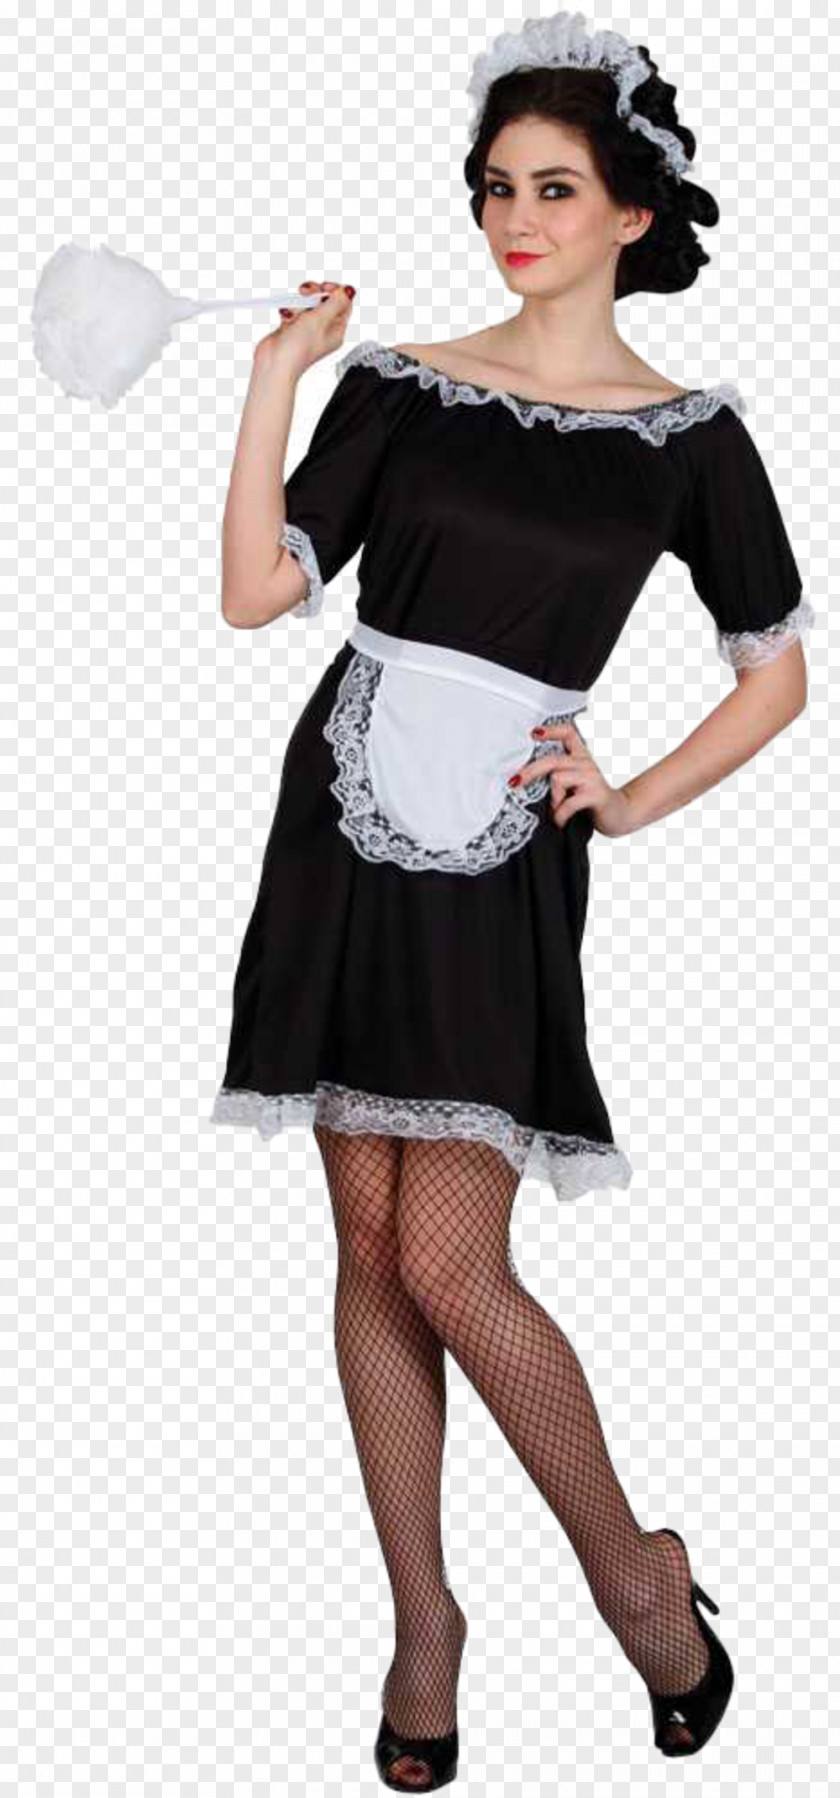 Satin French Maid Costume Party Dress Clothing Sizes PNG